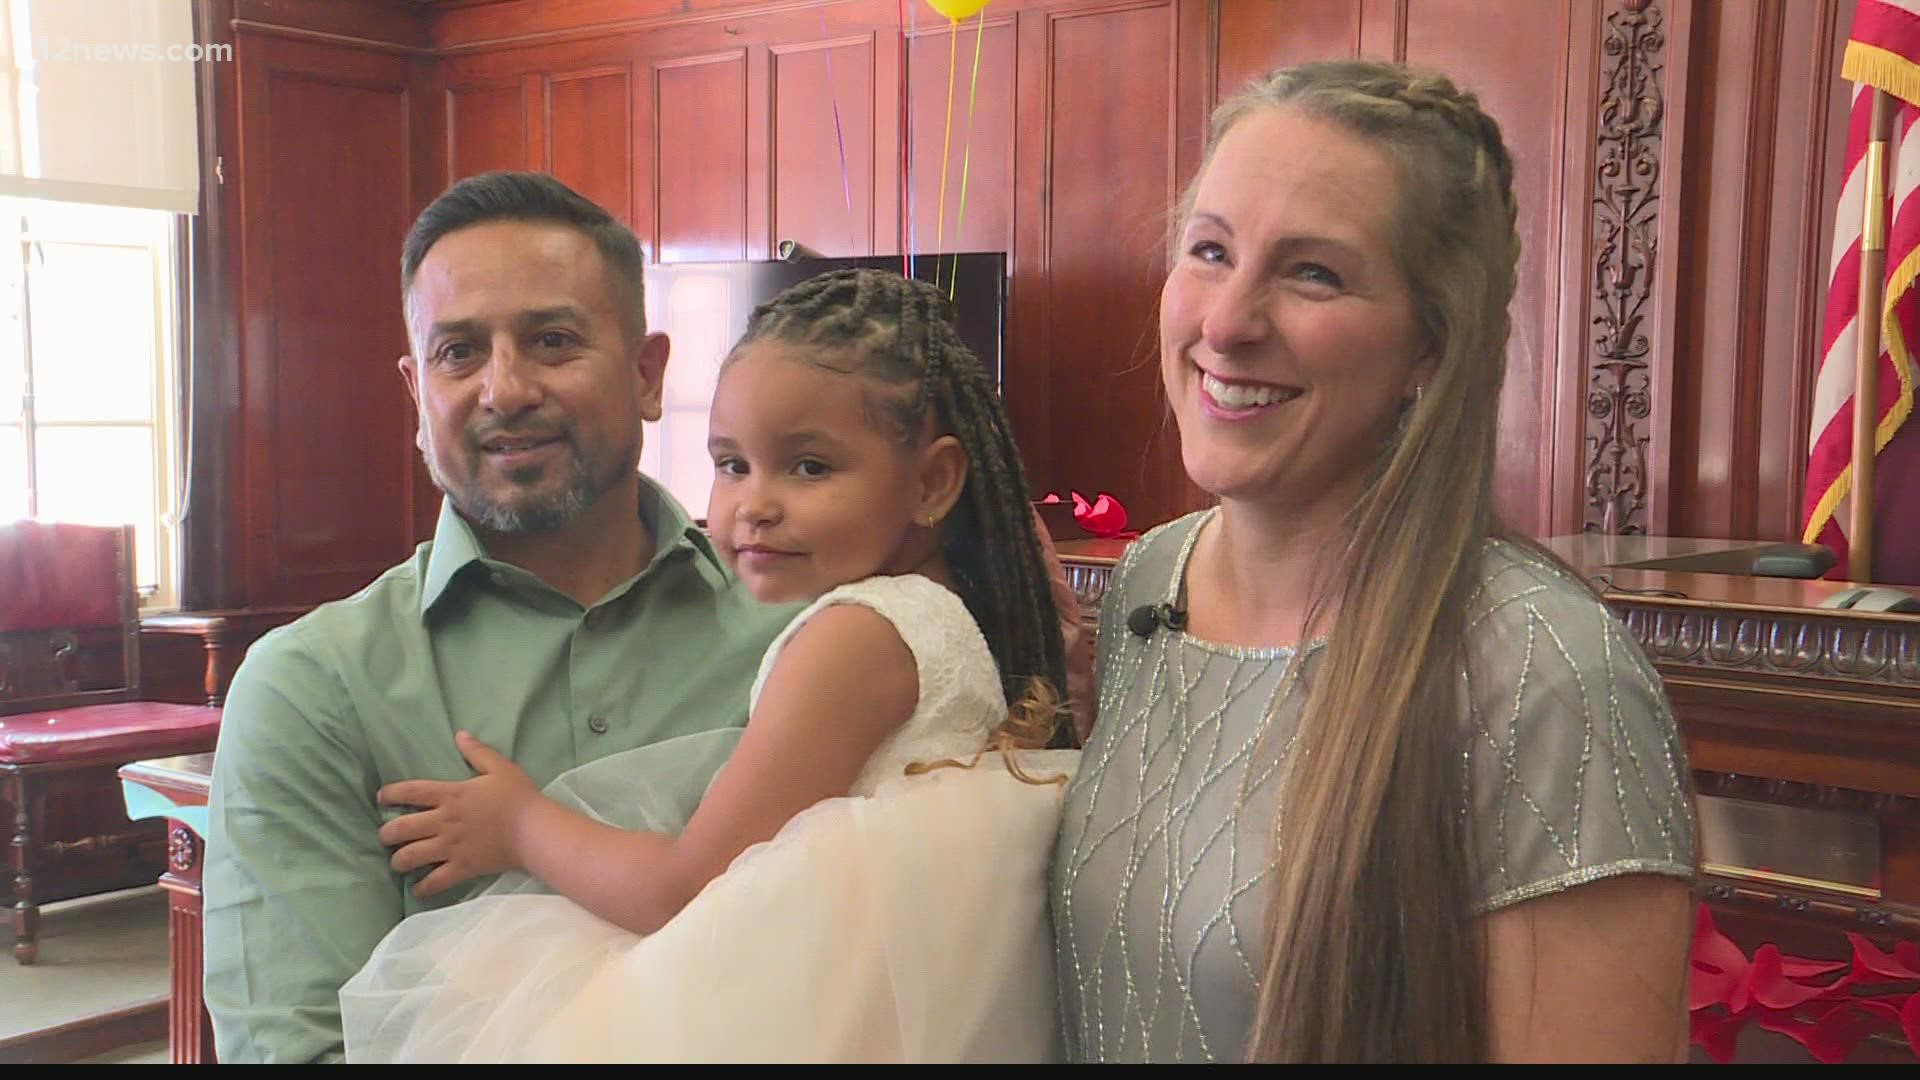 It's been a long journey for the Beccera family. But on the eve of National Adoption Day they formally welcomed their daughter, Raya, to the family.